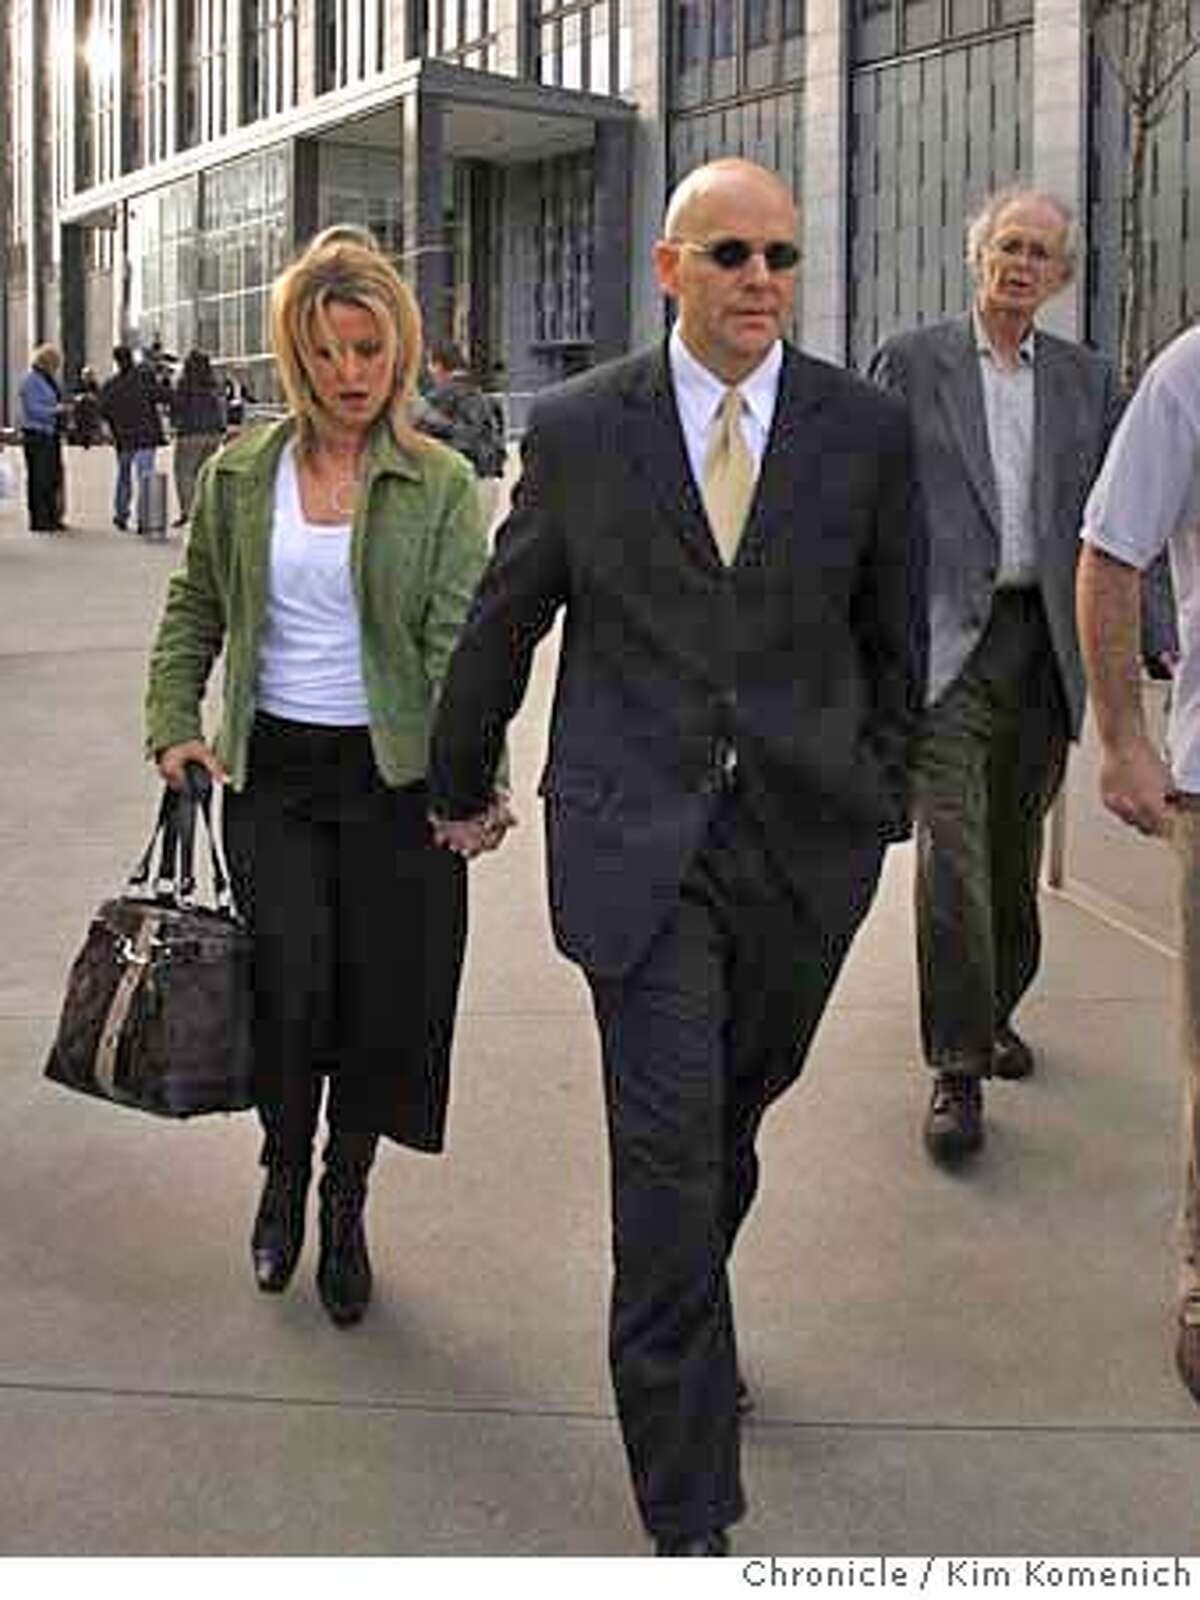 Attorney Troy Ellerman and unidentified companion exit the Federal Building in San Francisco after he leaking files in the BALCO case. The admission caused federal prosecutors to lift the subpoena against Chronicle reporters Mark Fainaru-Wada and Lance Williams. Photo by Kim Komenich/The Chronicle.